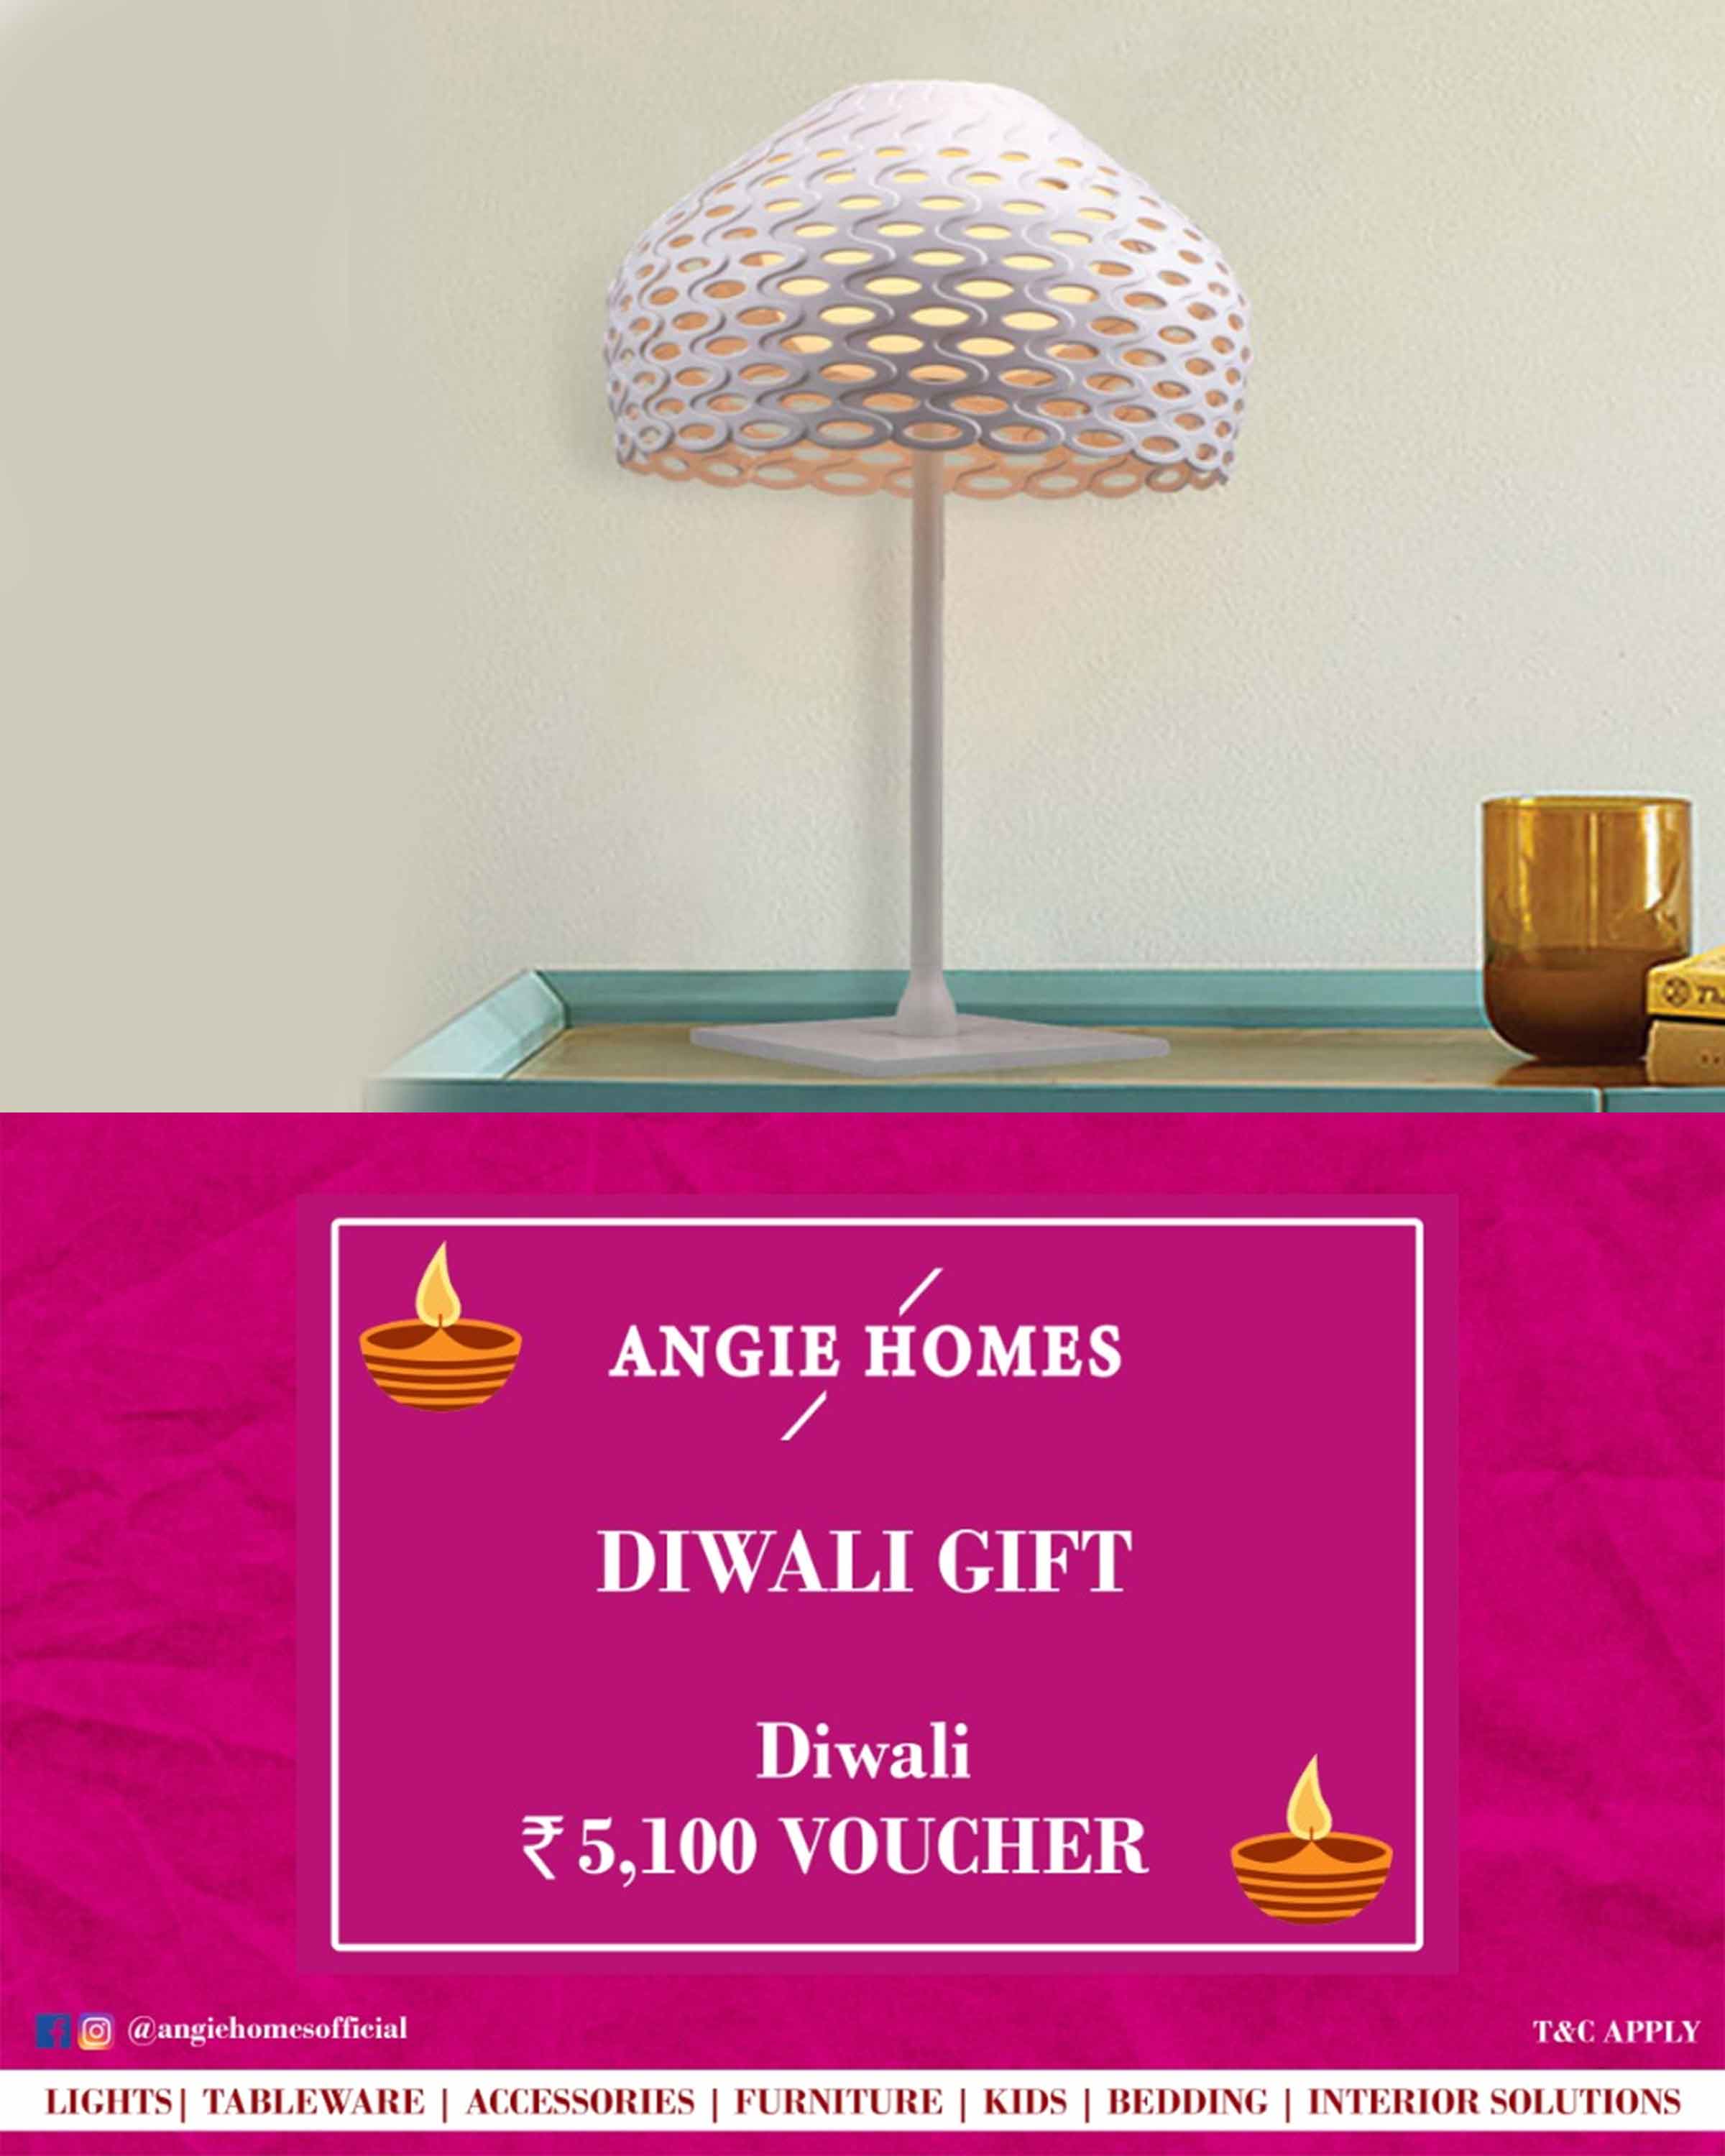 Online Diwali Gift Card Voucher for Stylish Table Lamp | Lights ANGIE HOMES